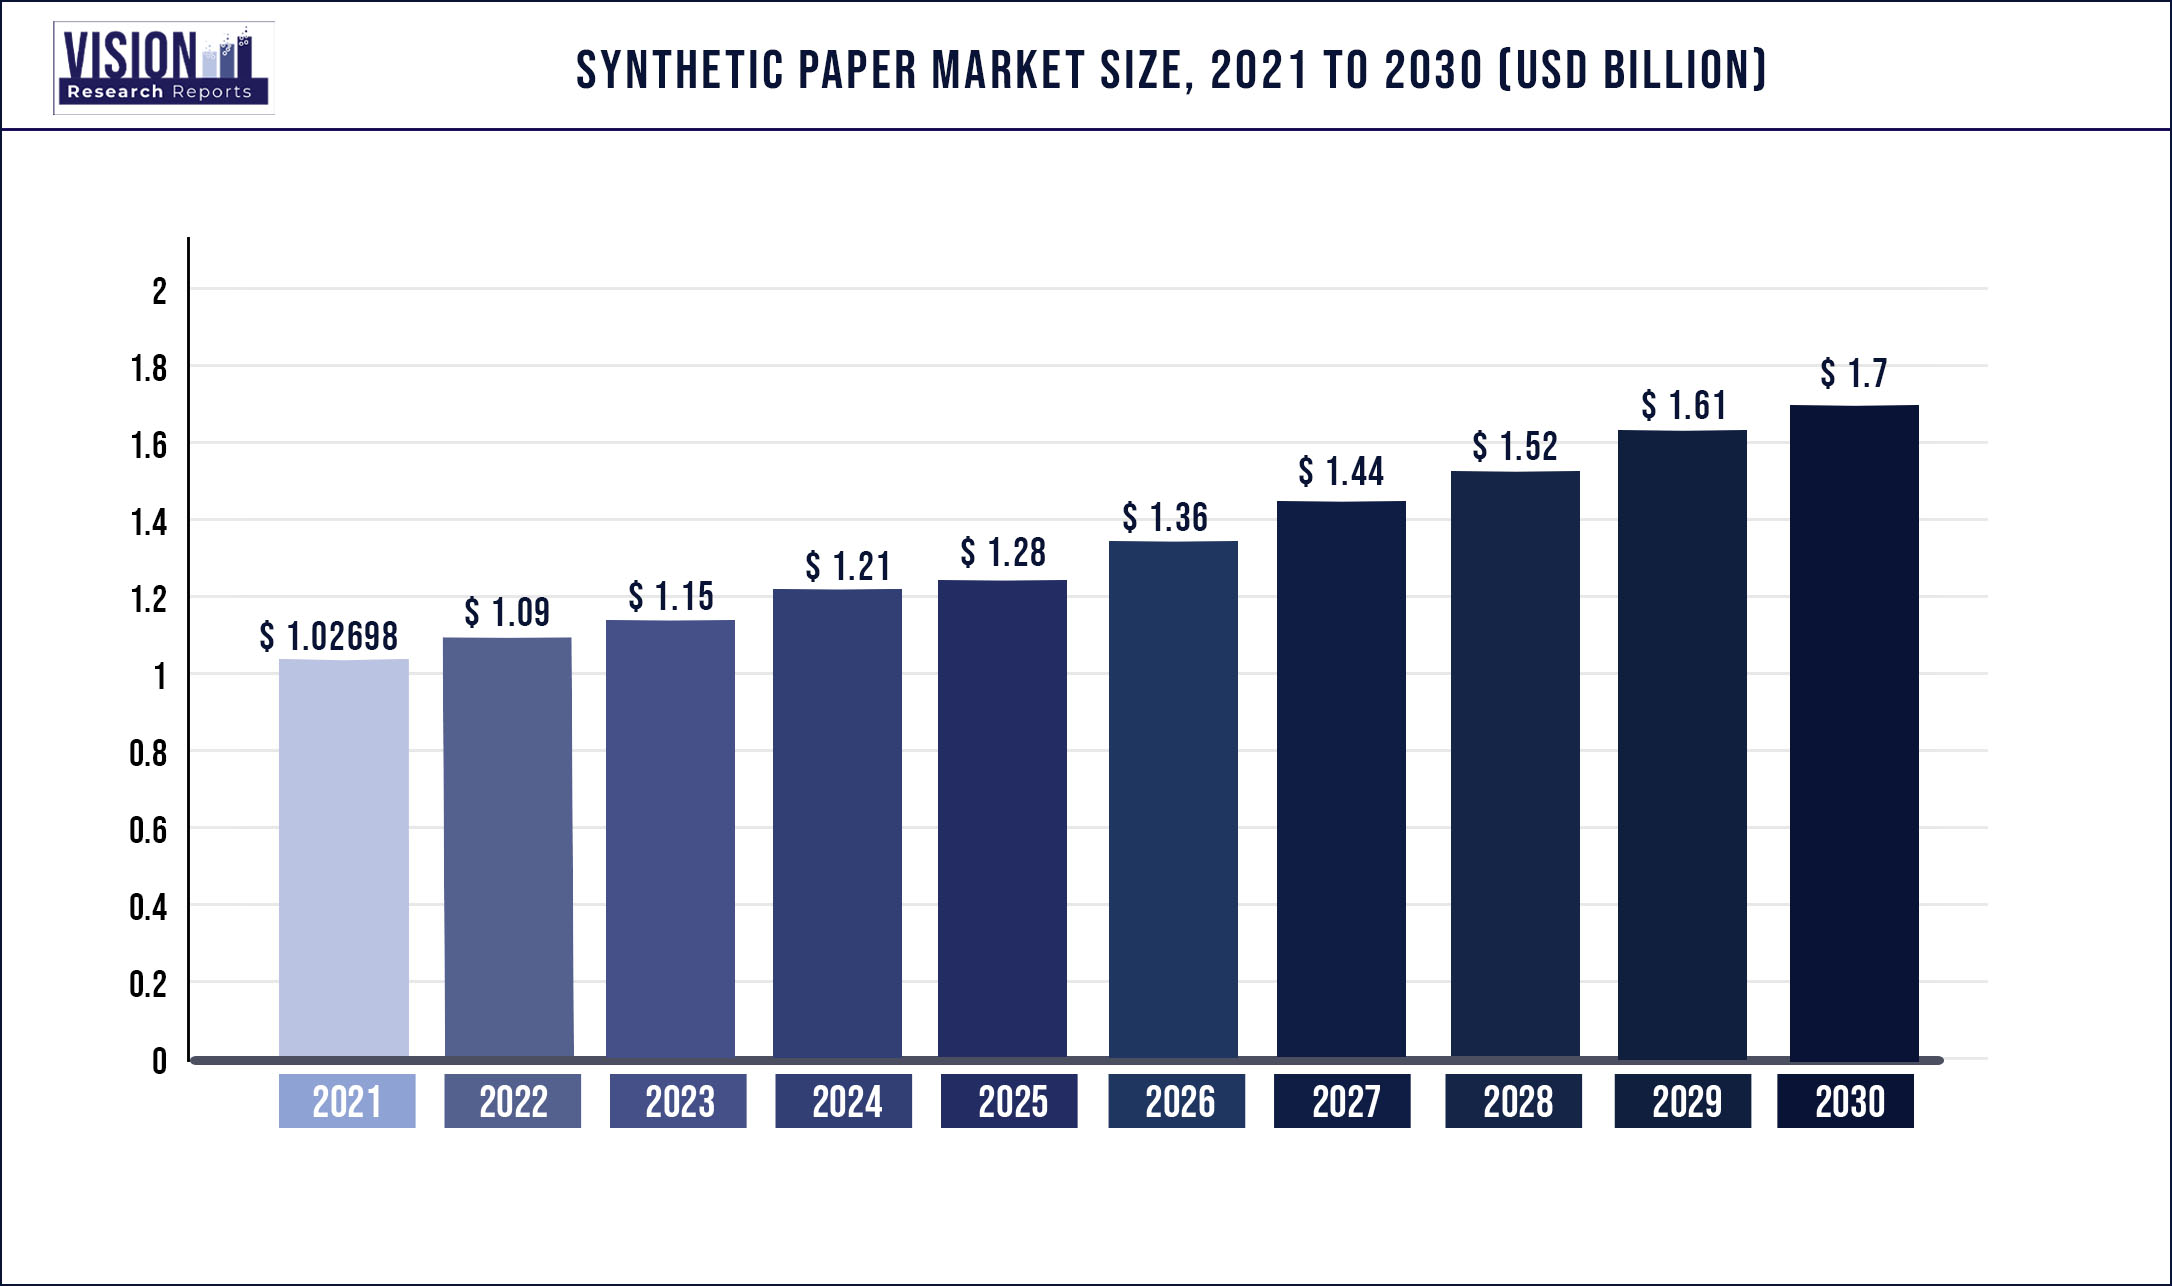 Synthetic Paper Market Size 2021 to 2030